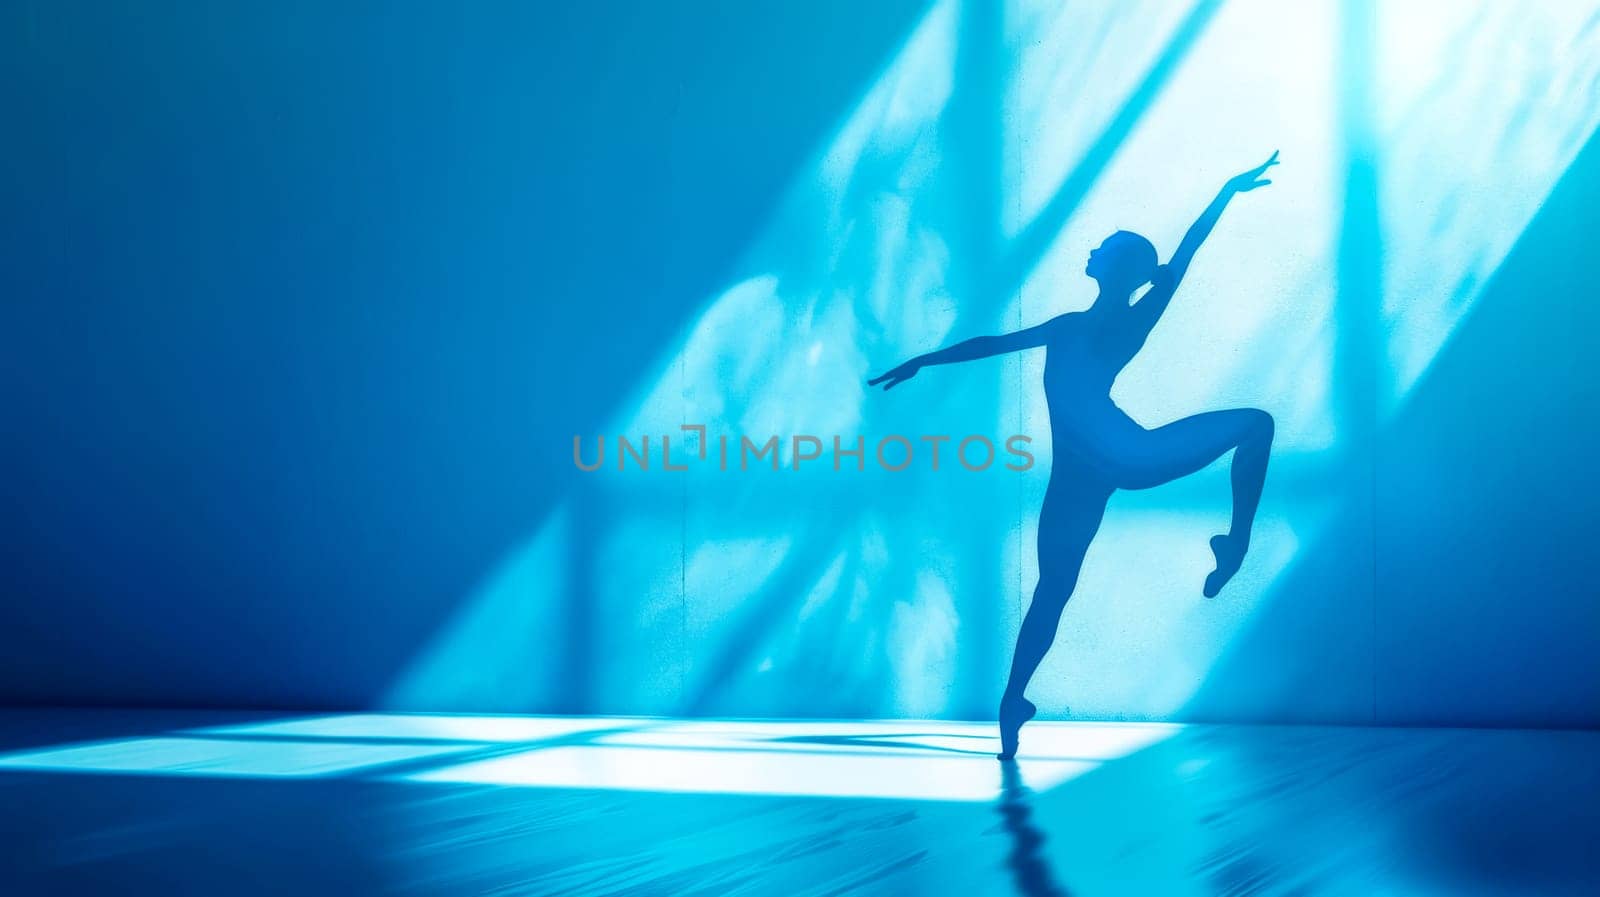 Ballet dancer's silhouette against a vibrant blue backdrop, expressing motion and poise